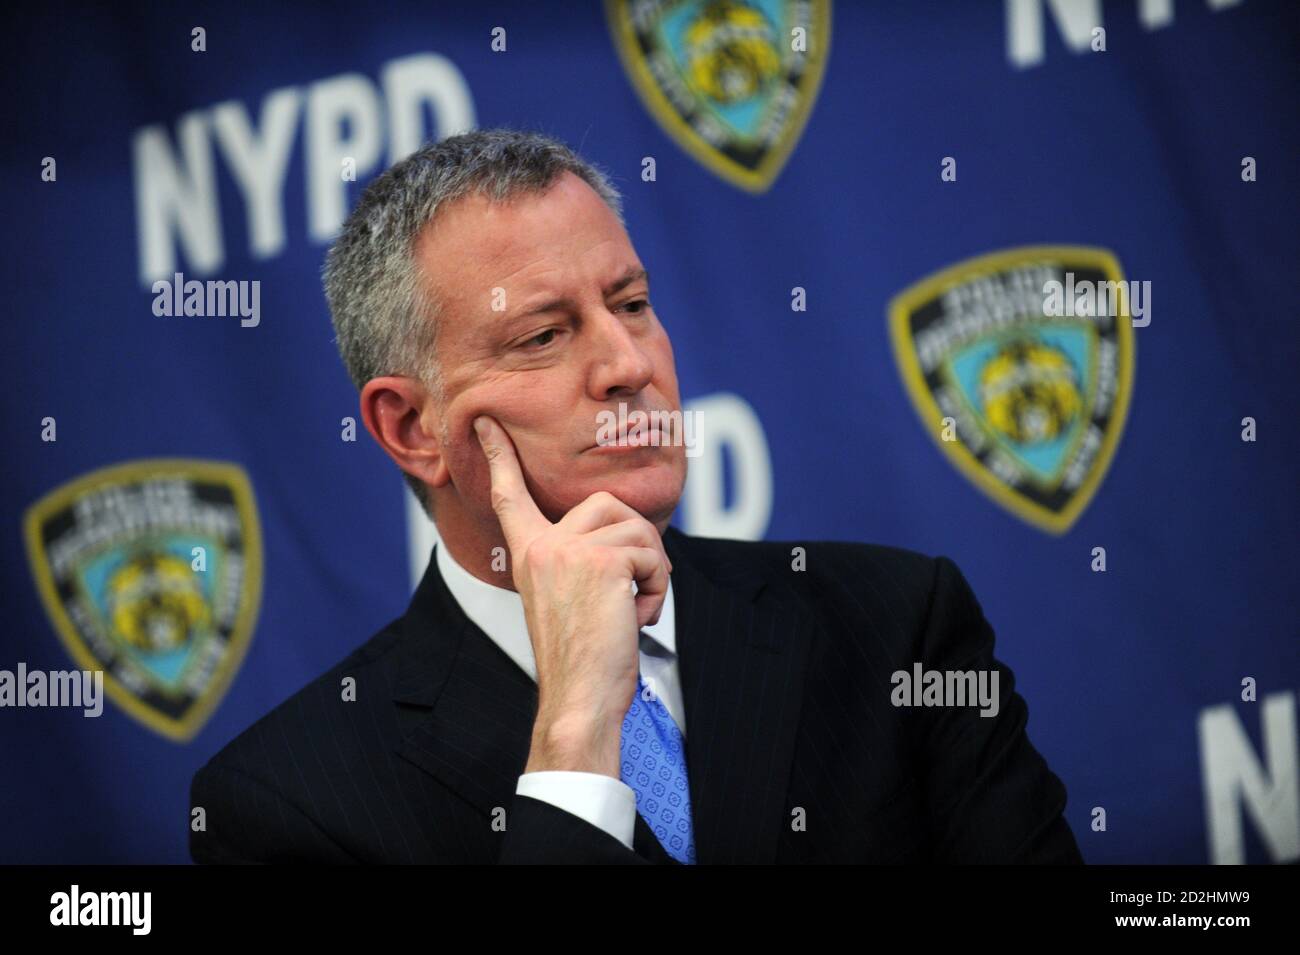 NEW YORK, NY - FEBRUARY 23: New York Mayor Bill de Blasio and Police Commissioner William Bratton announce CompStat 2.0 NYPD HQ on February 23, 2016 in New York City People:  Bill de Blasio Credit: Hoo-me / MediaPunch Stock Photo